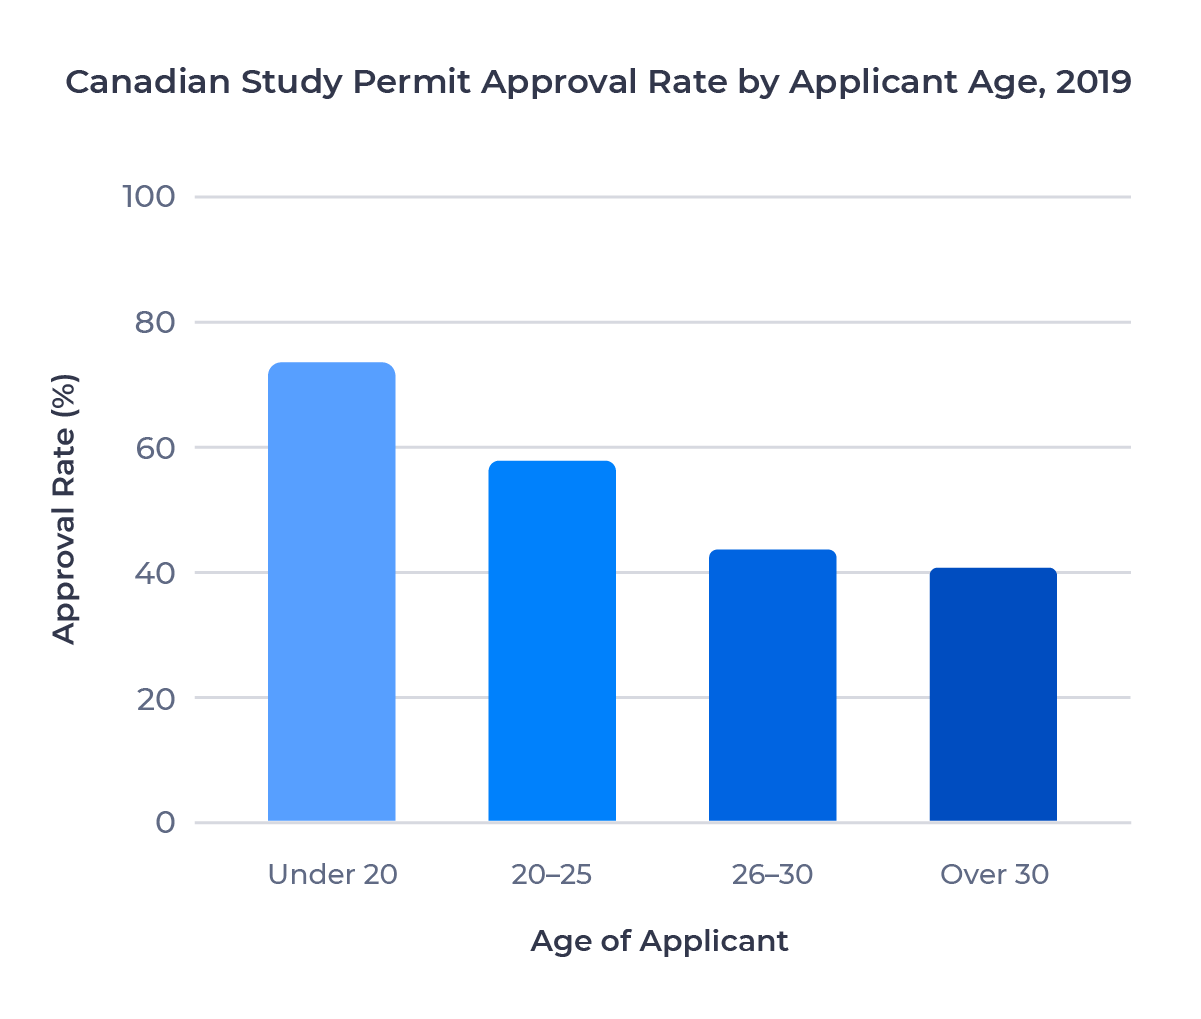 Bar chart showing Canadian study permit approval rates by applicant age in 2019. Examined in detail below.